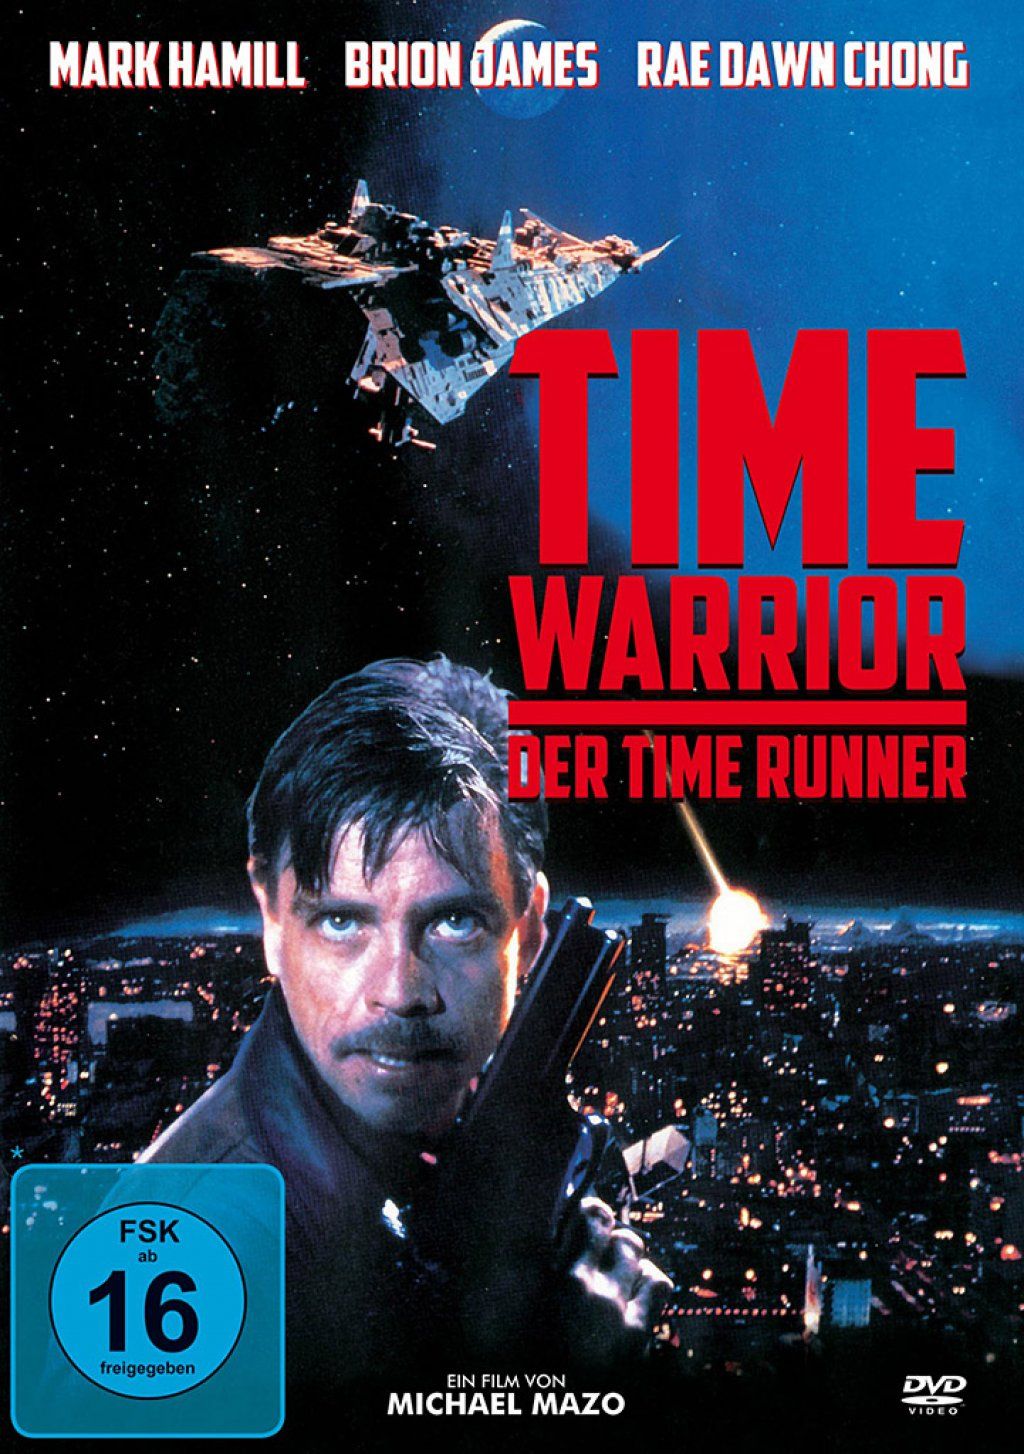 Time Warrior - The Time Runner